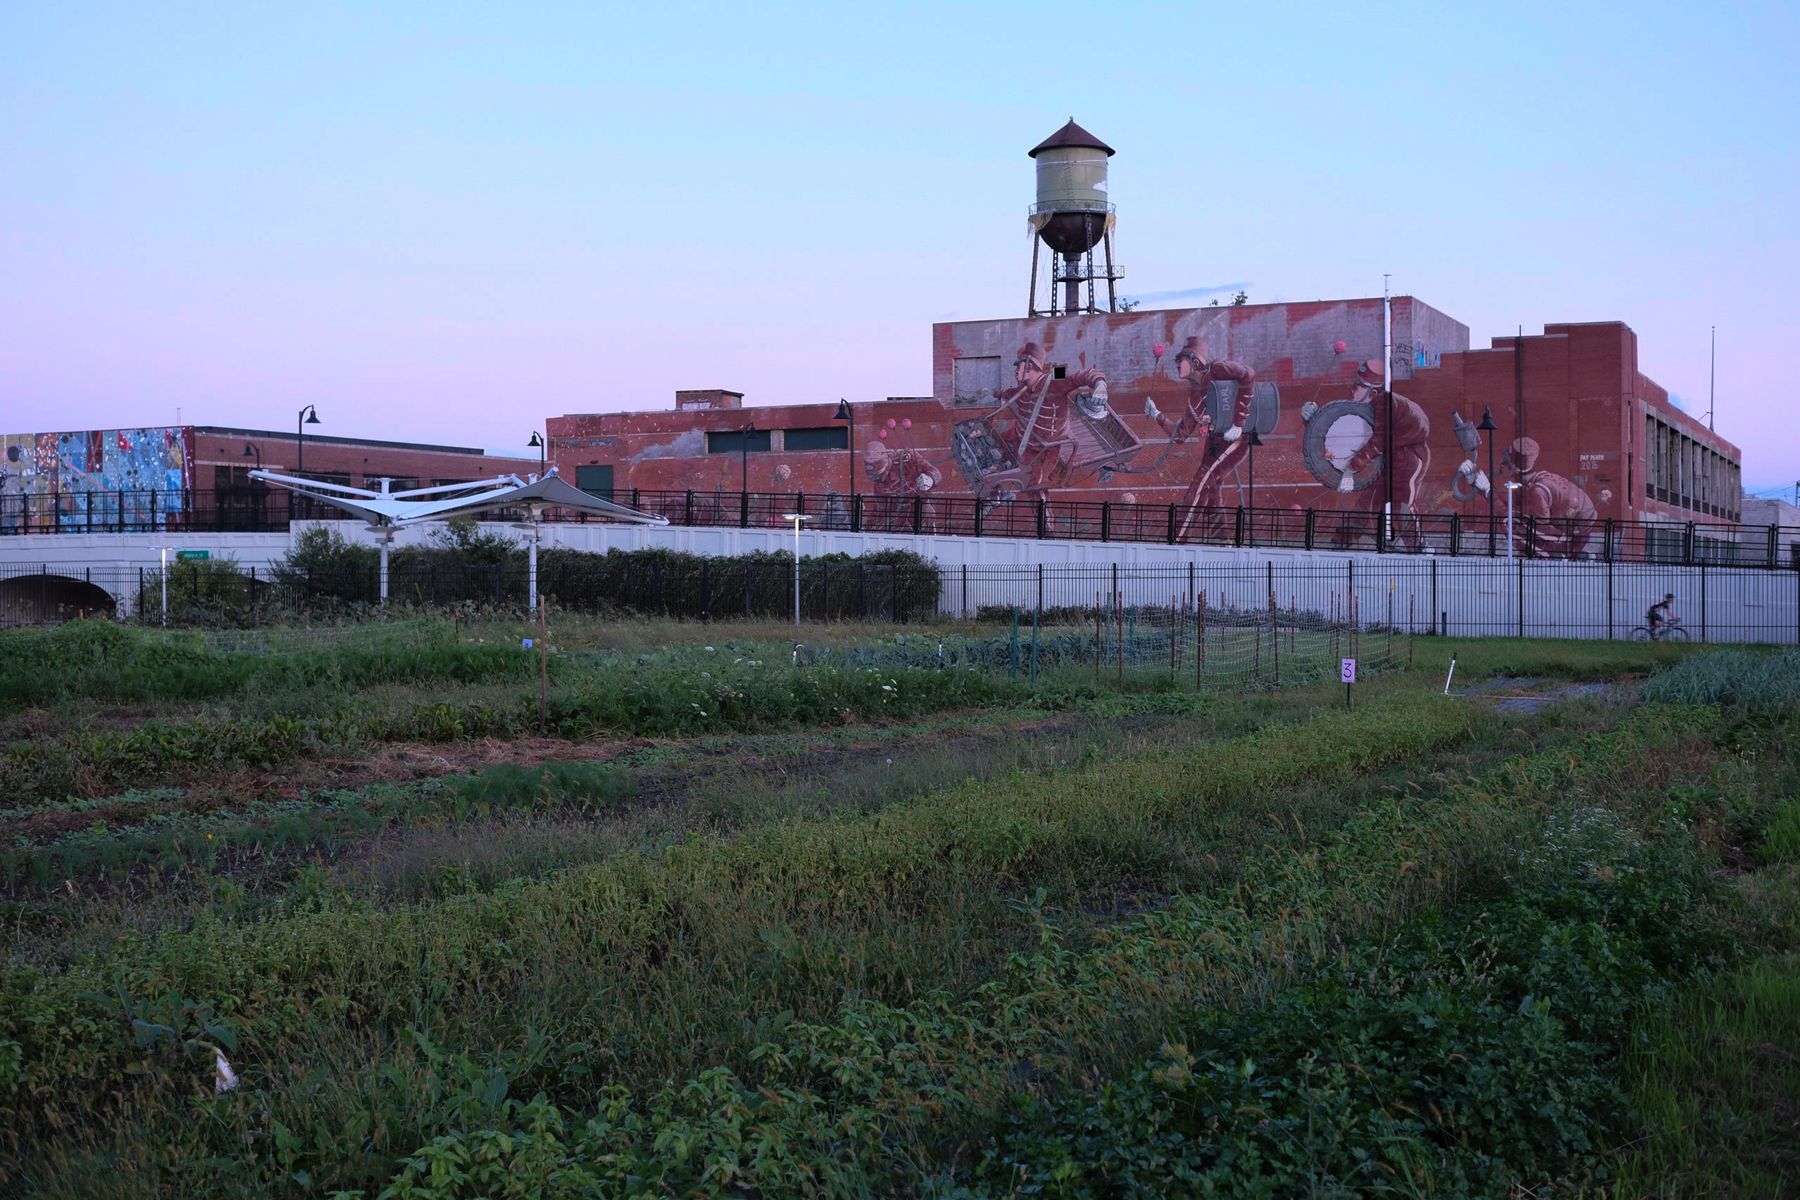 Lush green vegetable garden rows, graffitied warehouses, cotton-candy blue and pink sky.